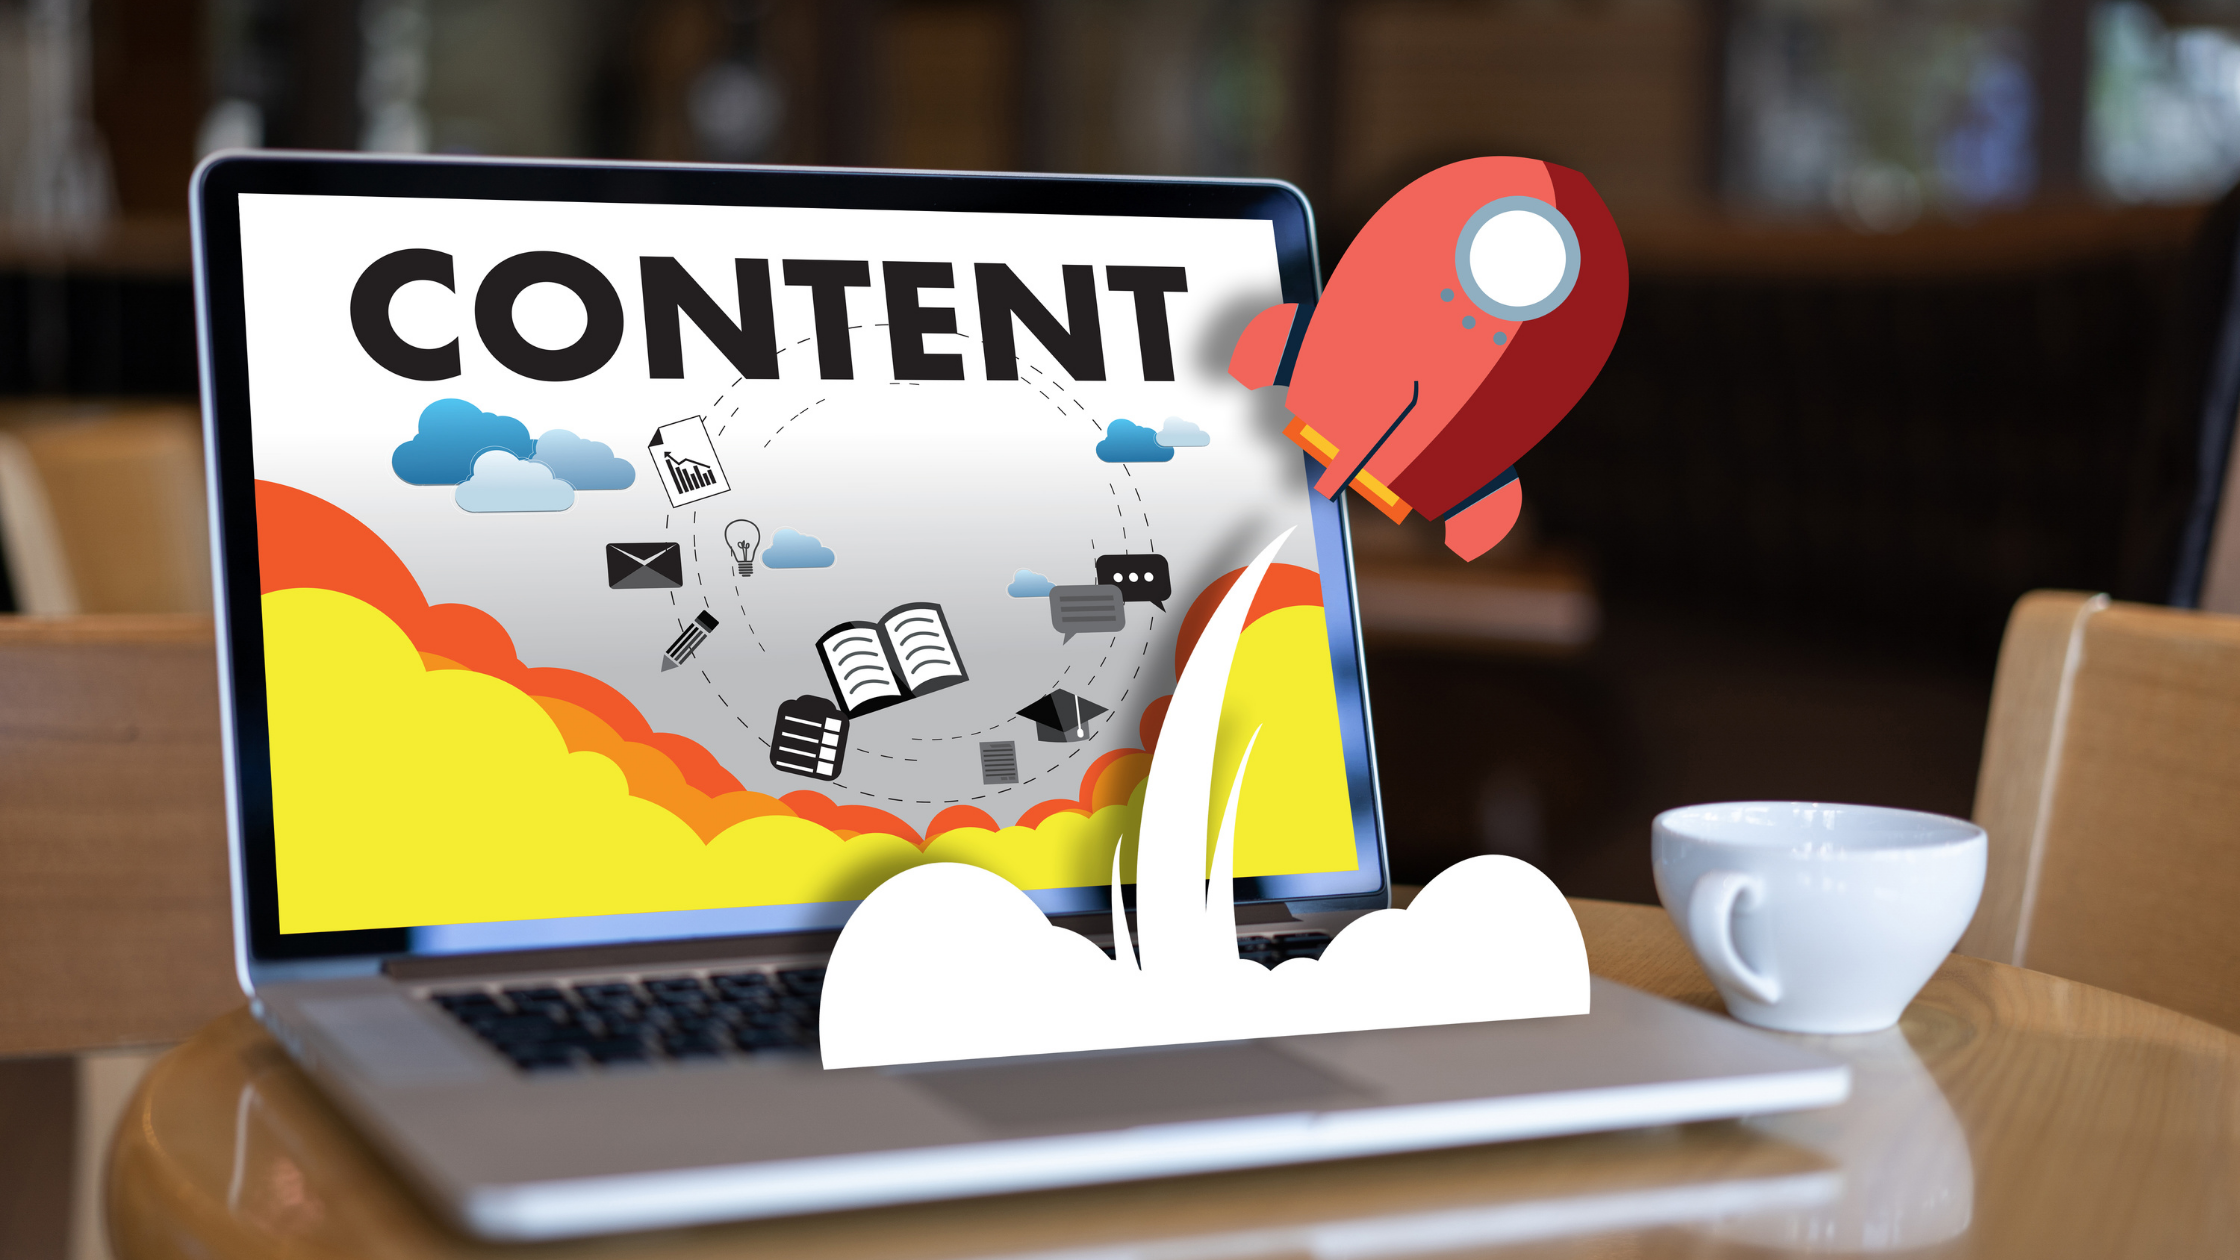 HOW TO EMPLOY CONTENT MARKETING IN YOUR COMPANY